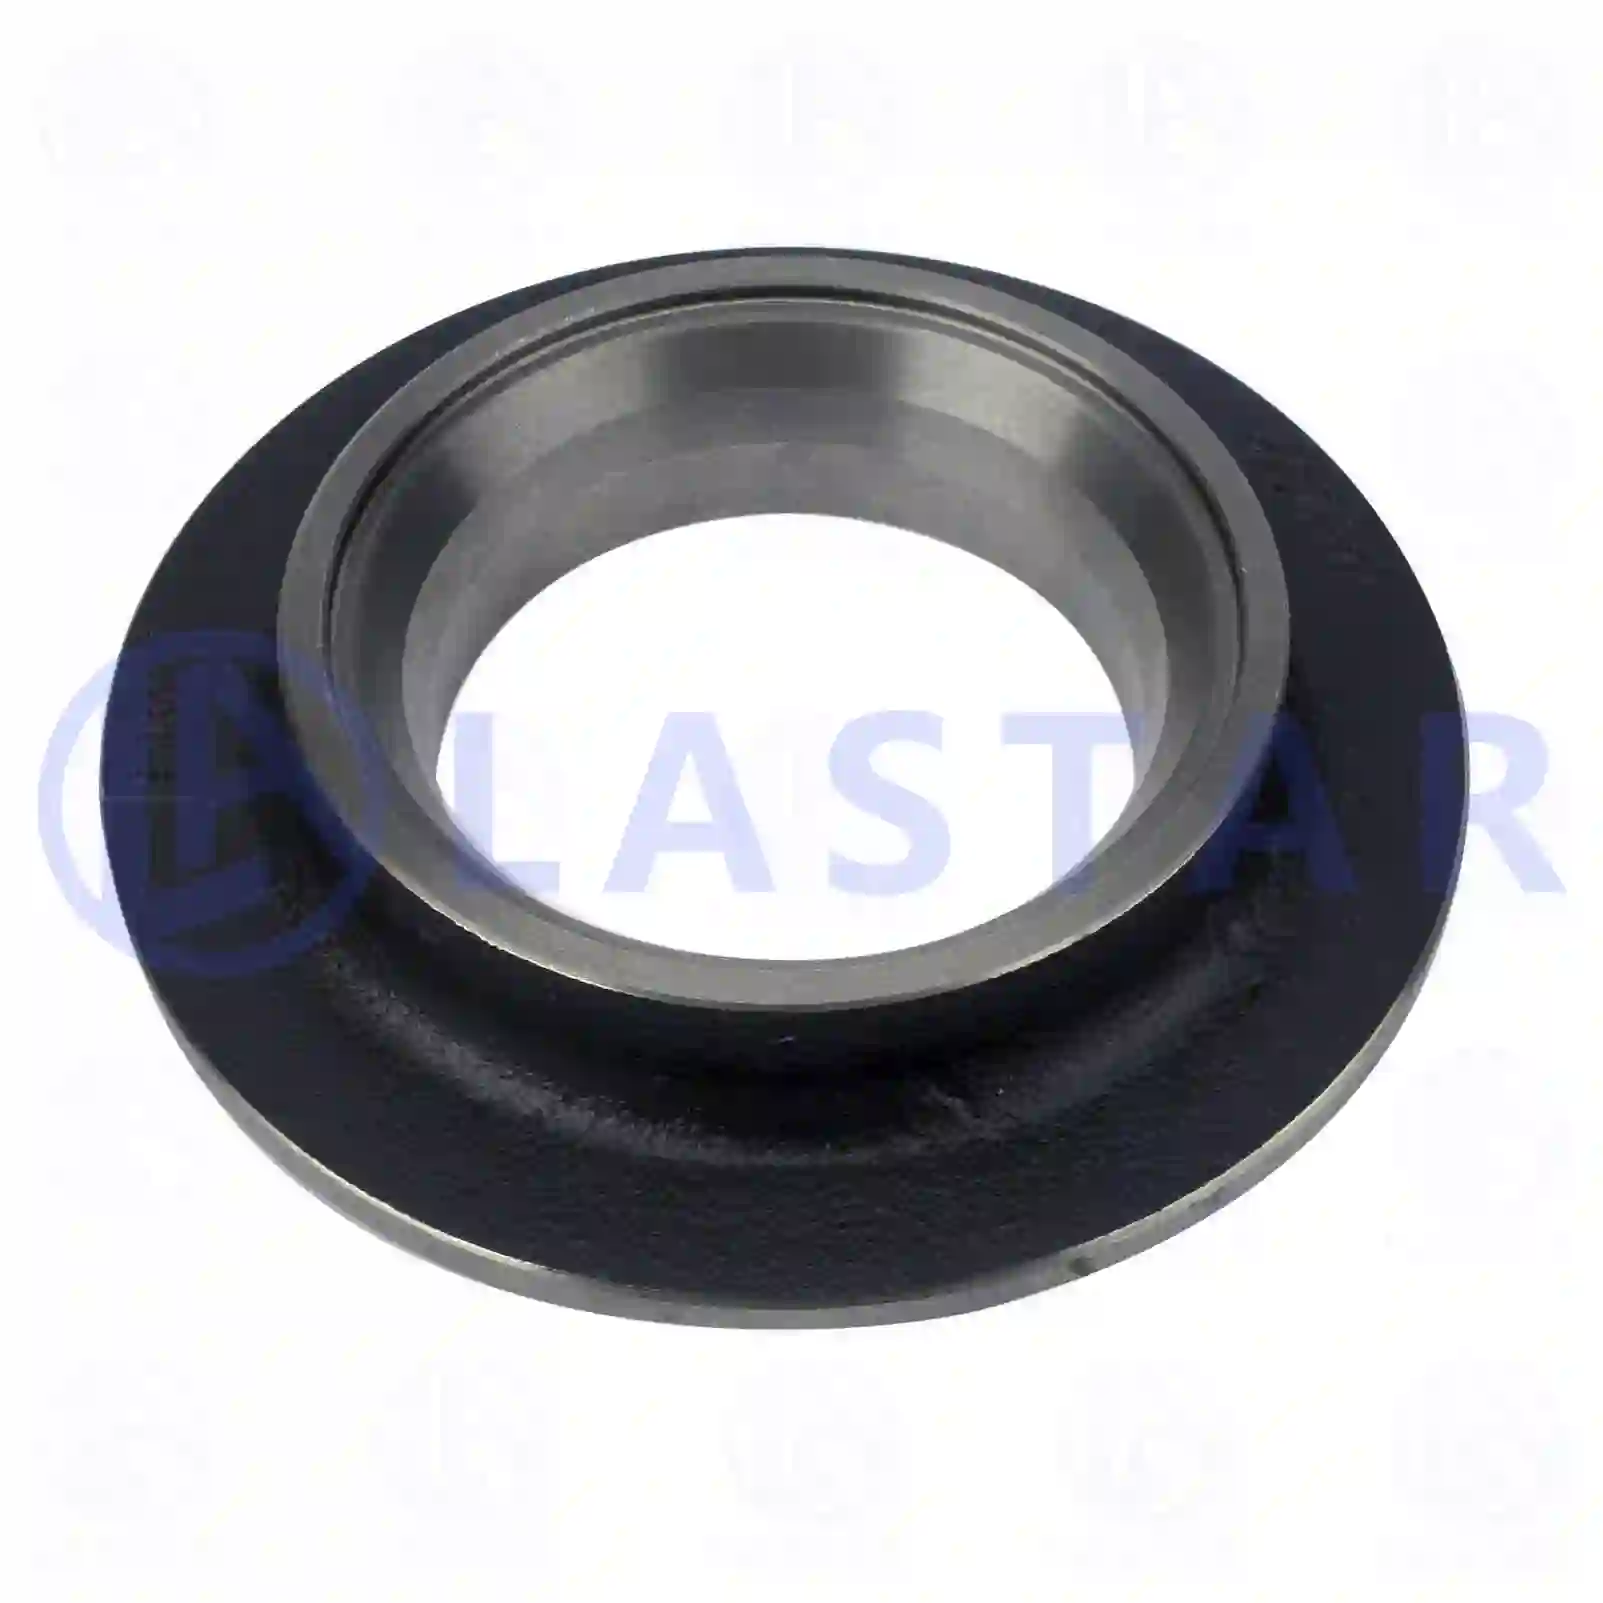 Spacer ring, 77731480, 141234, , , ||  77731480 Lastar Spare Part | Truck Spare Parts, Auotomotive Spare Parts Spacer ring, 77731480, 141234, , , ||  77731480 Lastar Spare Part | Truck Spare Parts, Auotomotive Spare Parts